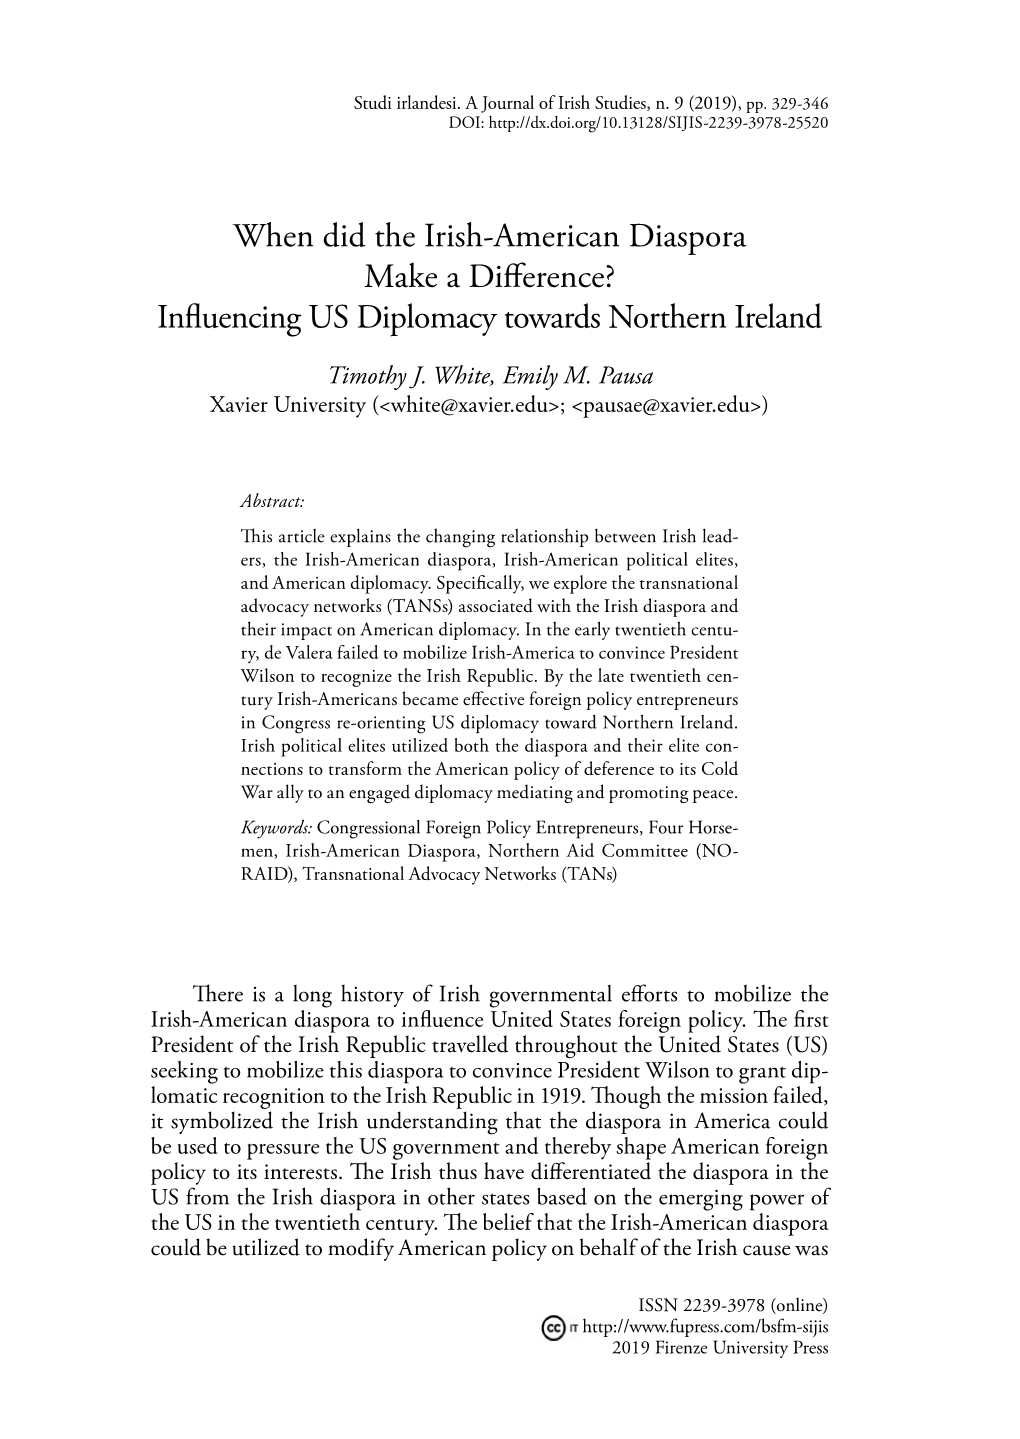 When Did the Irish-American Diaspora Make a Difference? Influencing US Diplomacy Towards Northern Ireland